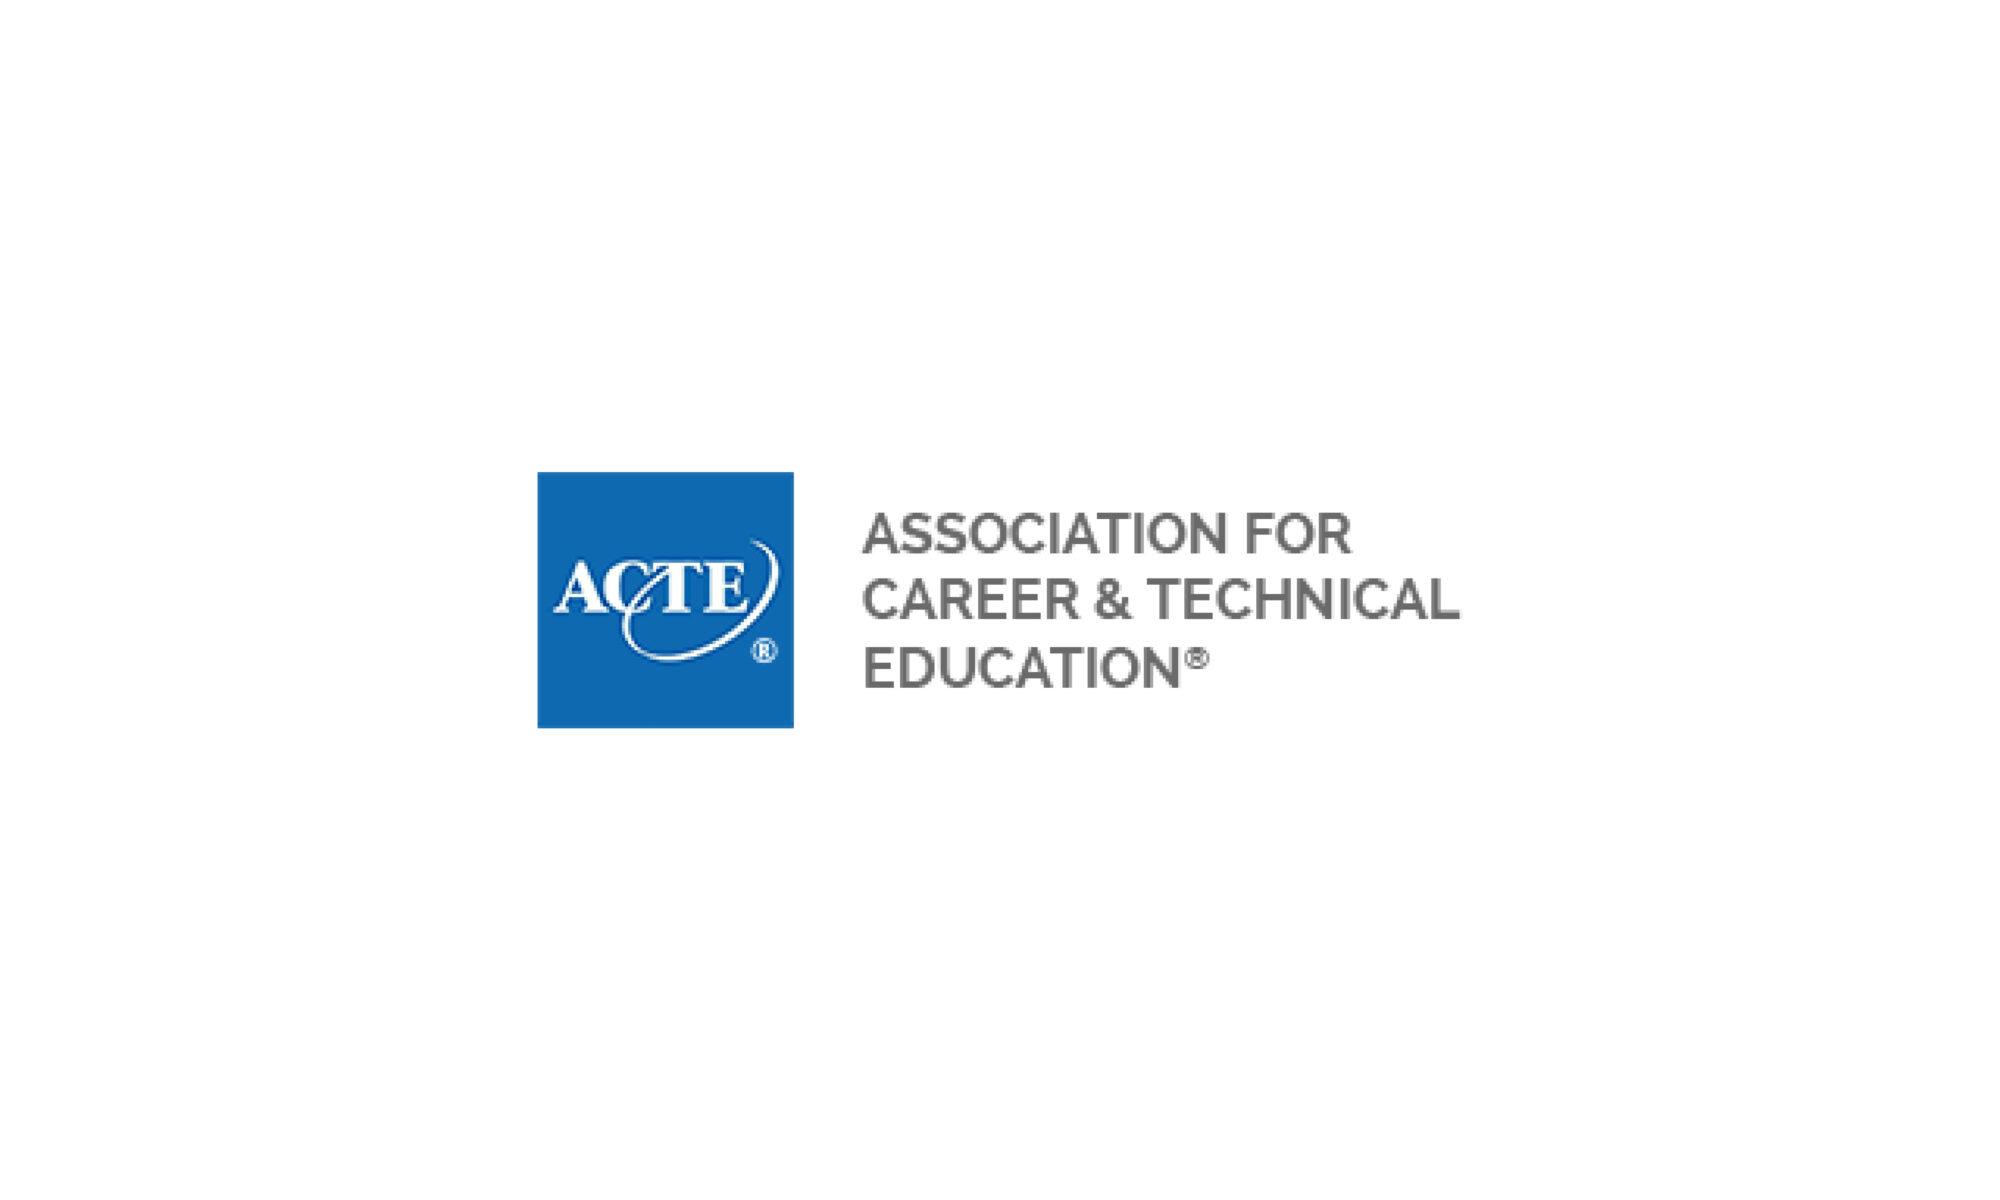 Association for career and technical education logo